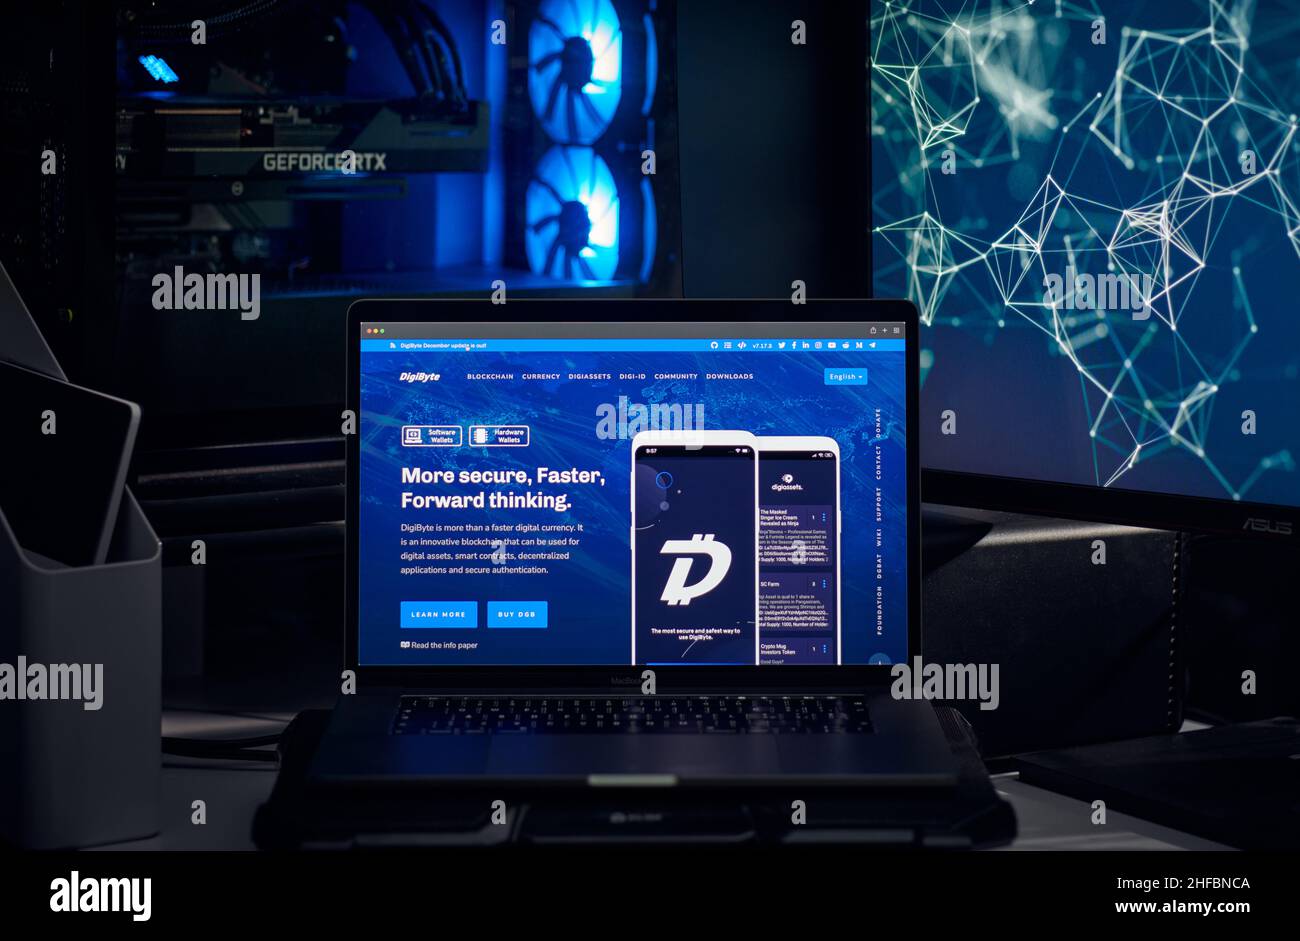 Milan, Italy - January 11, 2022: digibyte - DGB website's hp seen on a laptop screen. digibyte, DGB coin logo visible. Cryptocurrency, defi, nft conce Stock Photo